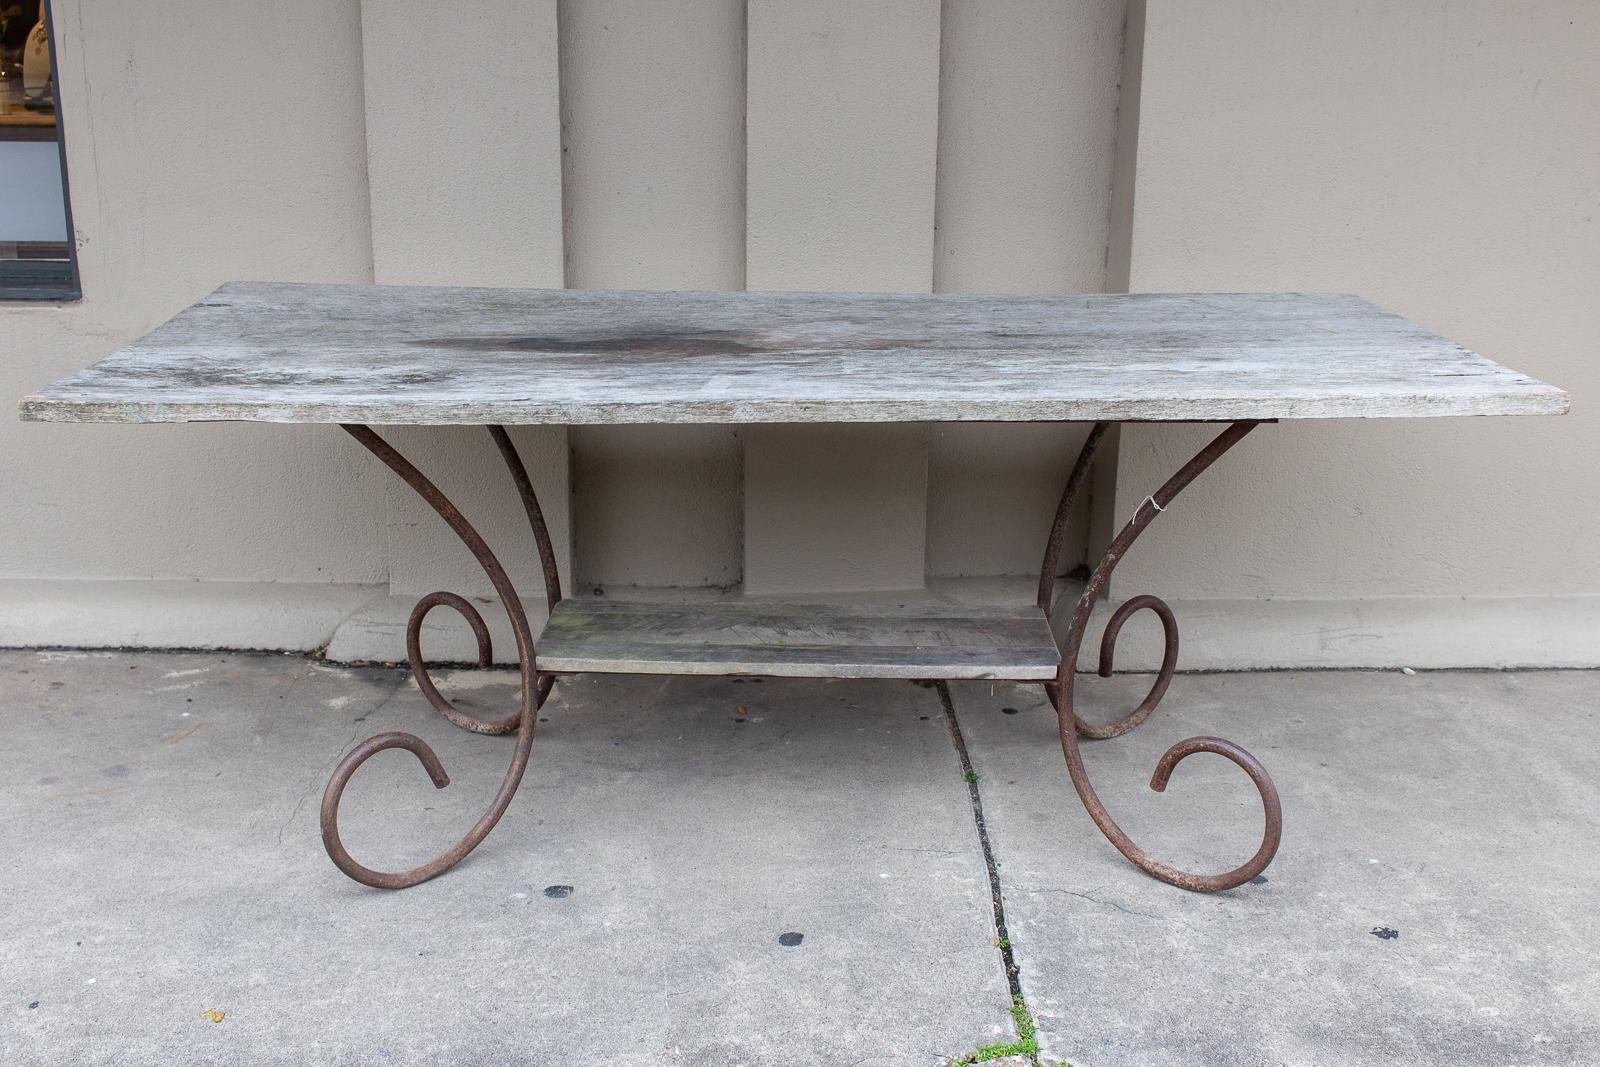 This antique table was sourced from France and came out of a Parisian flower shop. The iron base features wonderful, curved legs with a lower, inset shelf and the distressed finish adds lots of character. The table is weathered and shows some stains